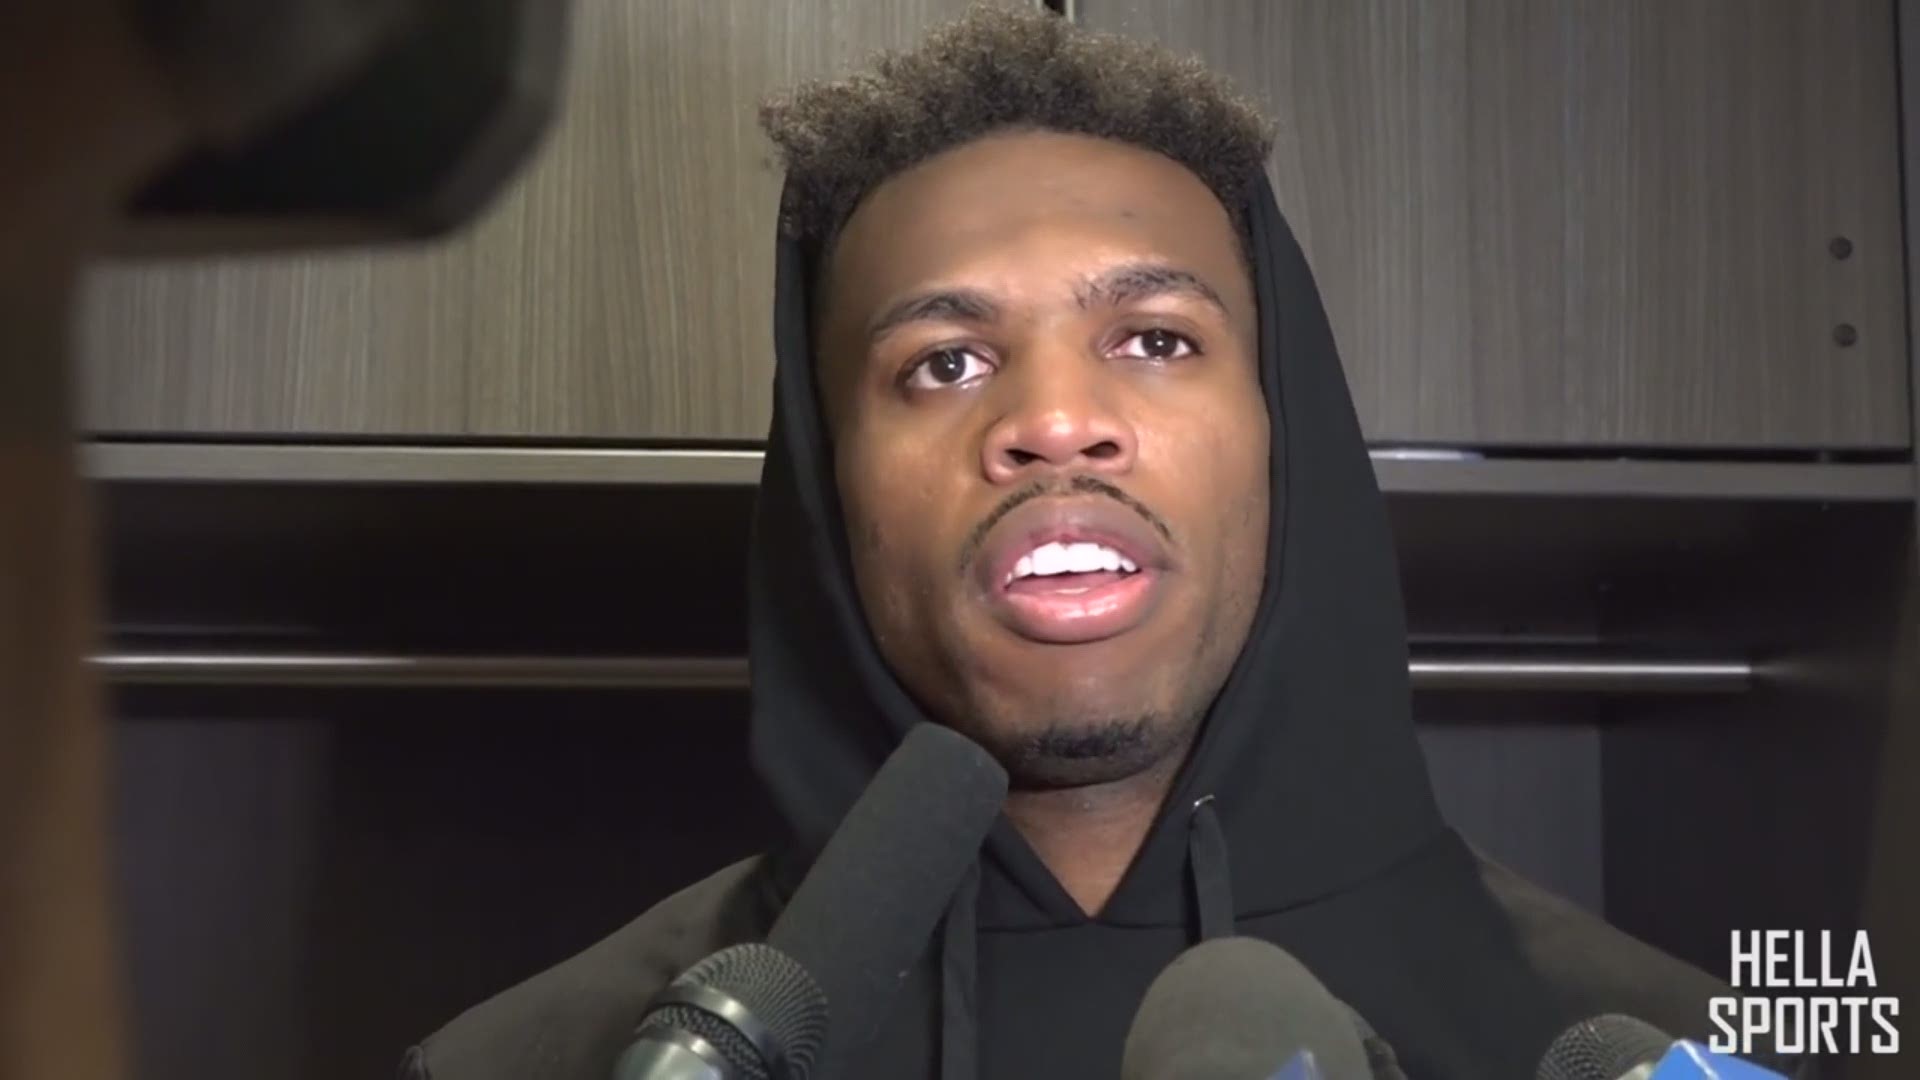 Kings guard Buddy Hield discusses Sacramento's second consecutive loss in Monday's 114-112 loss at home to the Orlando Magic.